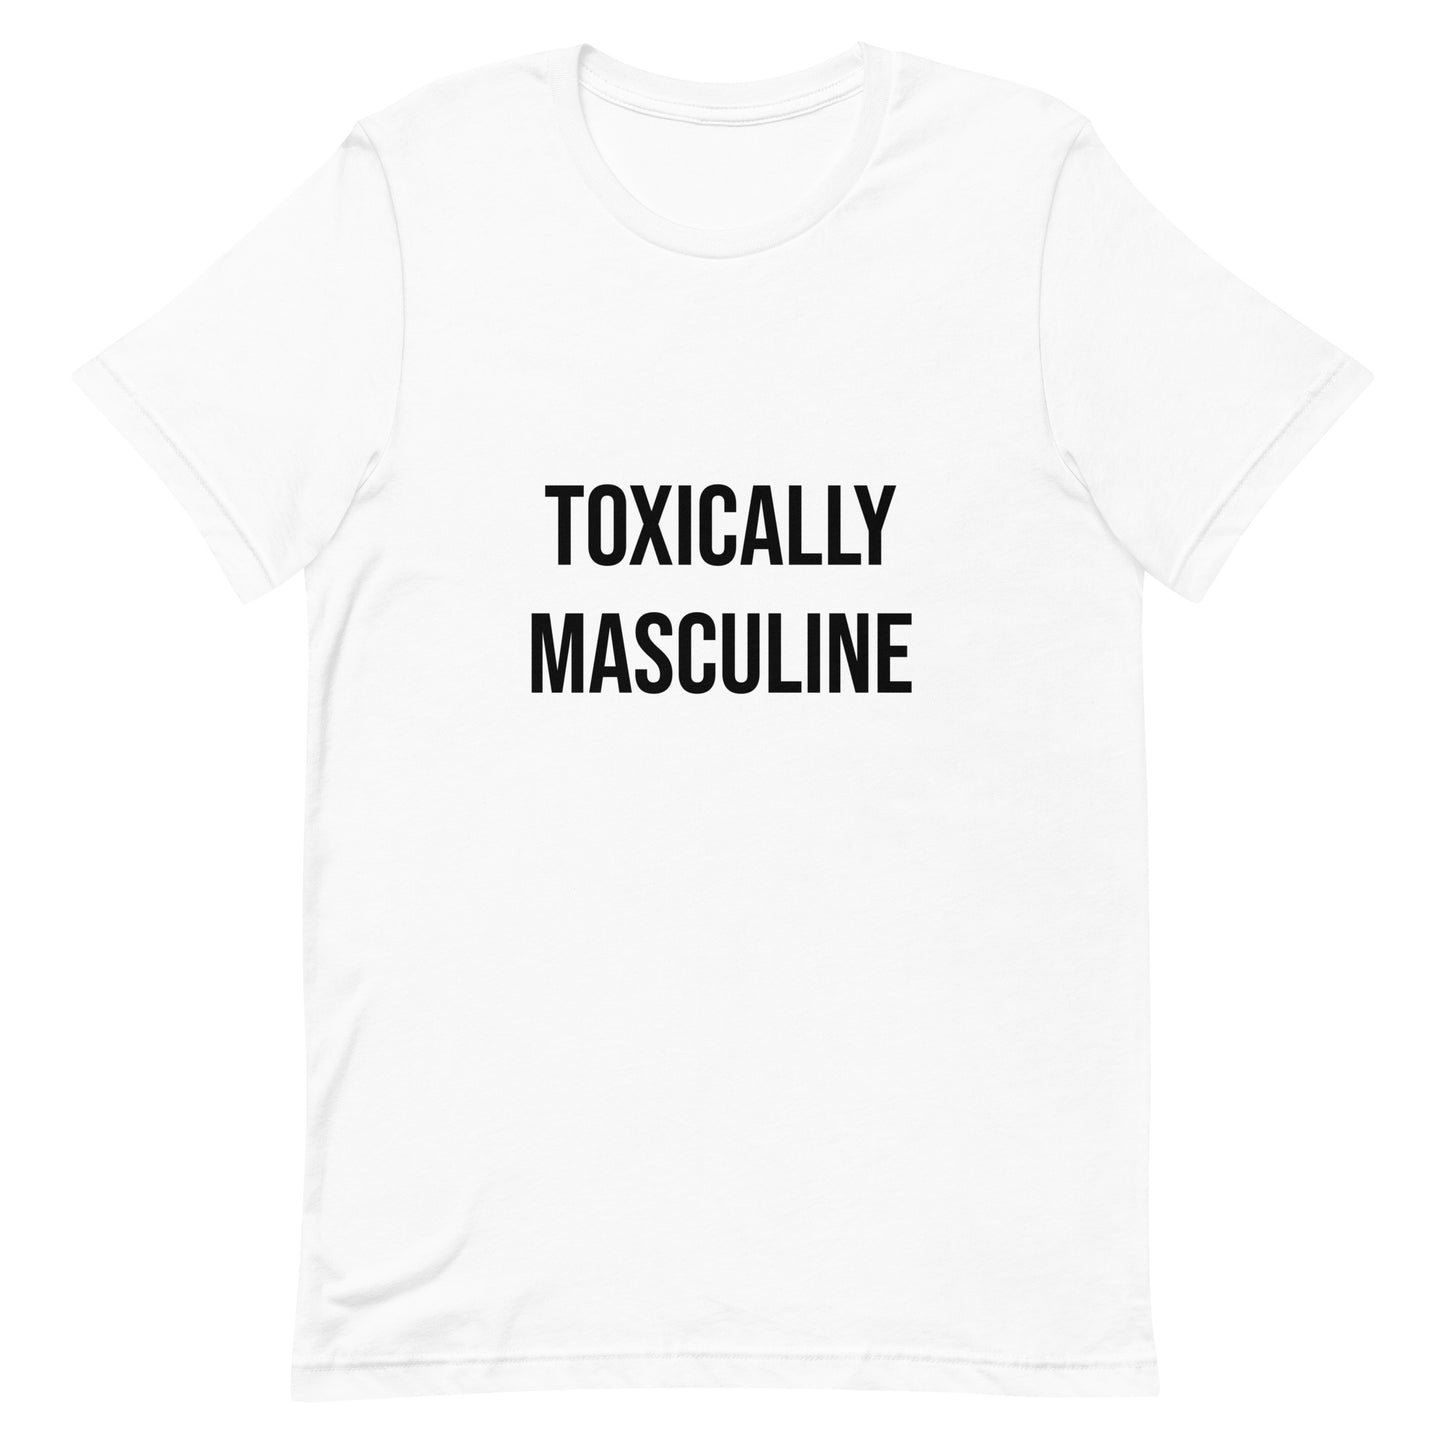 Toxically Masculine T-shirt